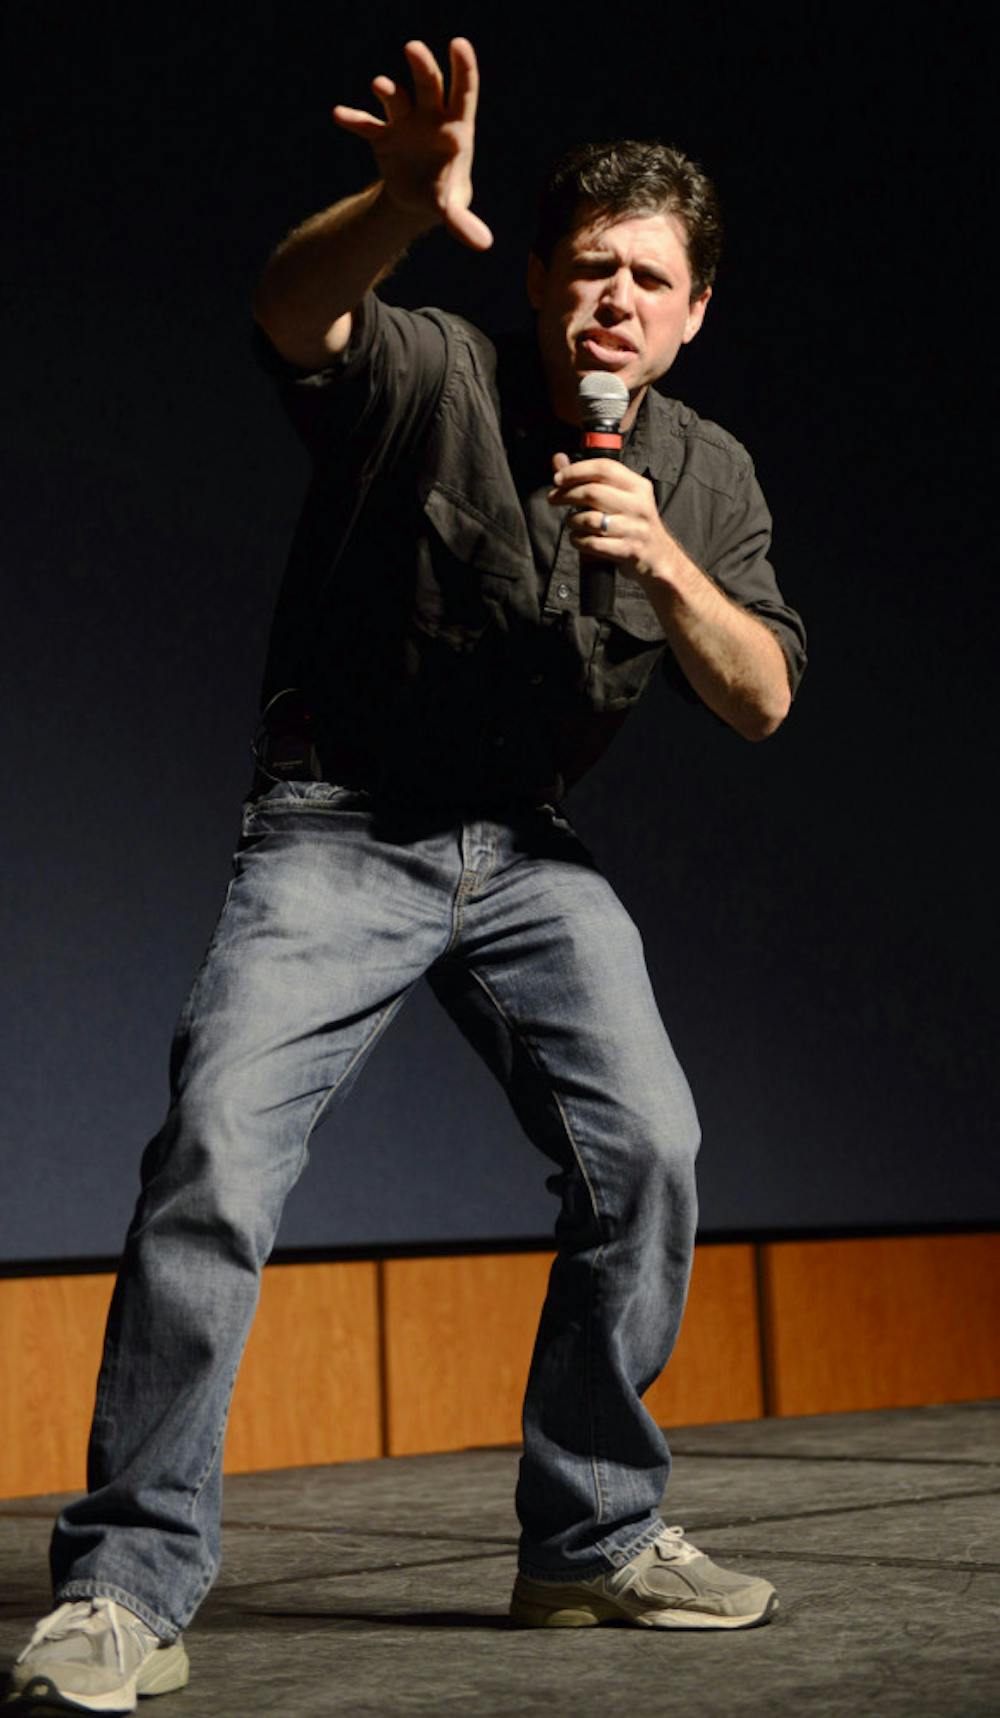 <p>Max Brooks, author of “World War Z,” “The Zombie Survival Guide” and graphic novel “The Zombie Survival Guide: Recorded Attacks,” speaks Wednesday evening in the Reitz Union Rion Ballroom. The event featured music, food, a costume contest and a book signing.</p>